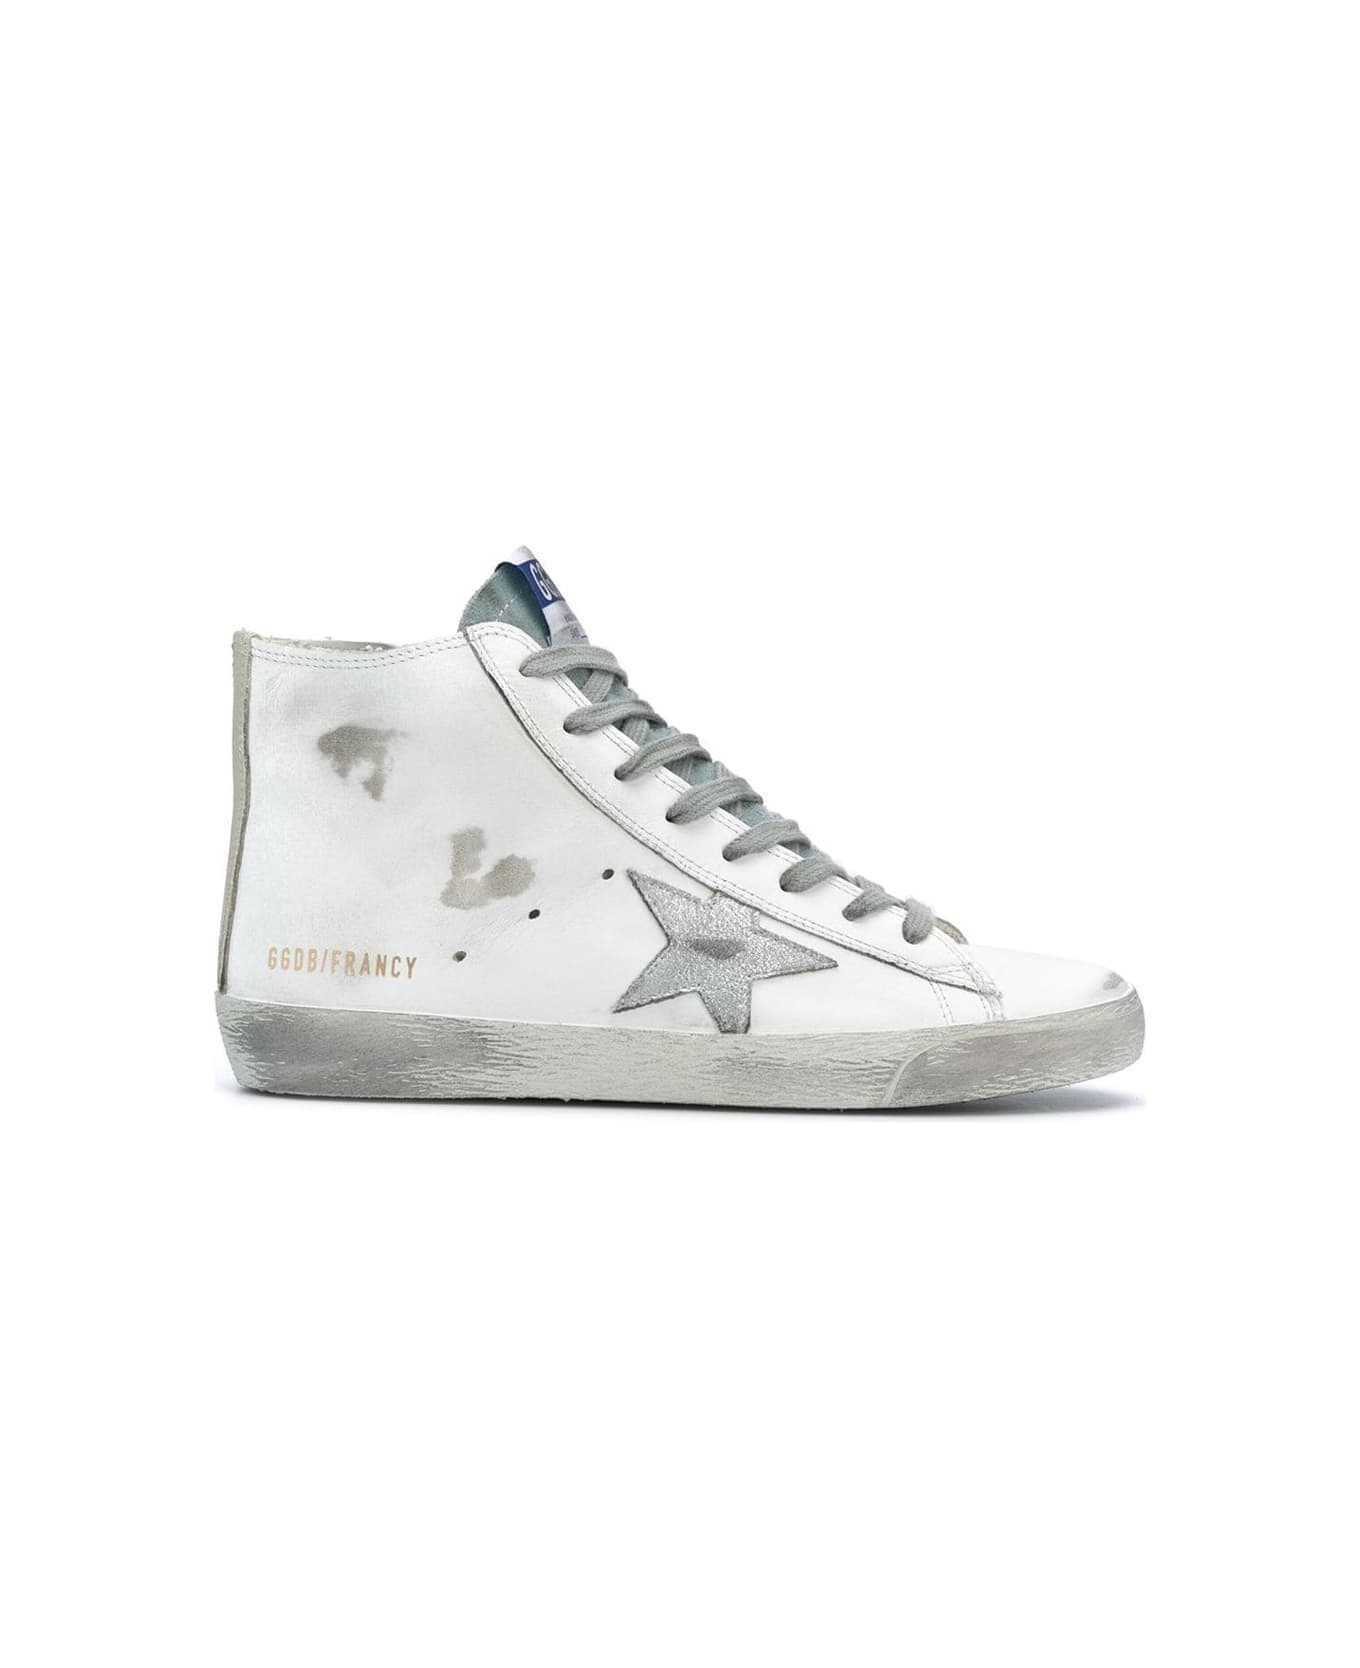 Golden Goose Francy Leather Upper Suede Laminated Star - White Silver Milk